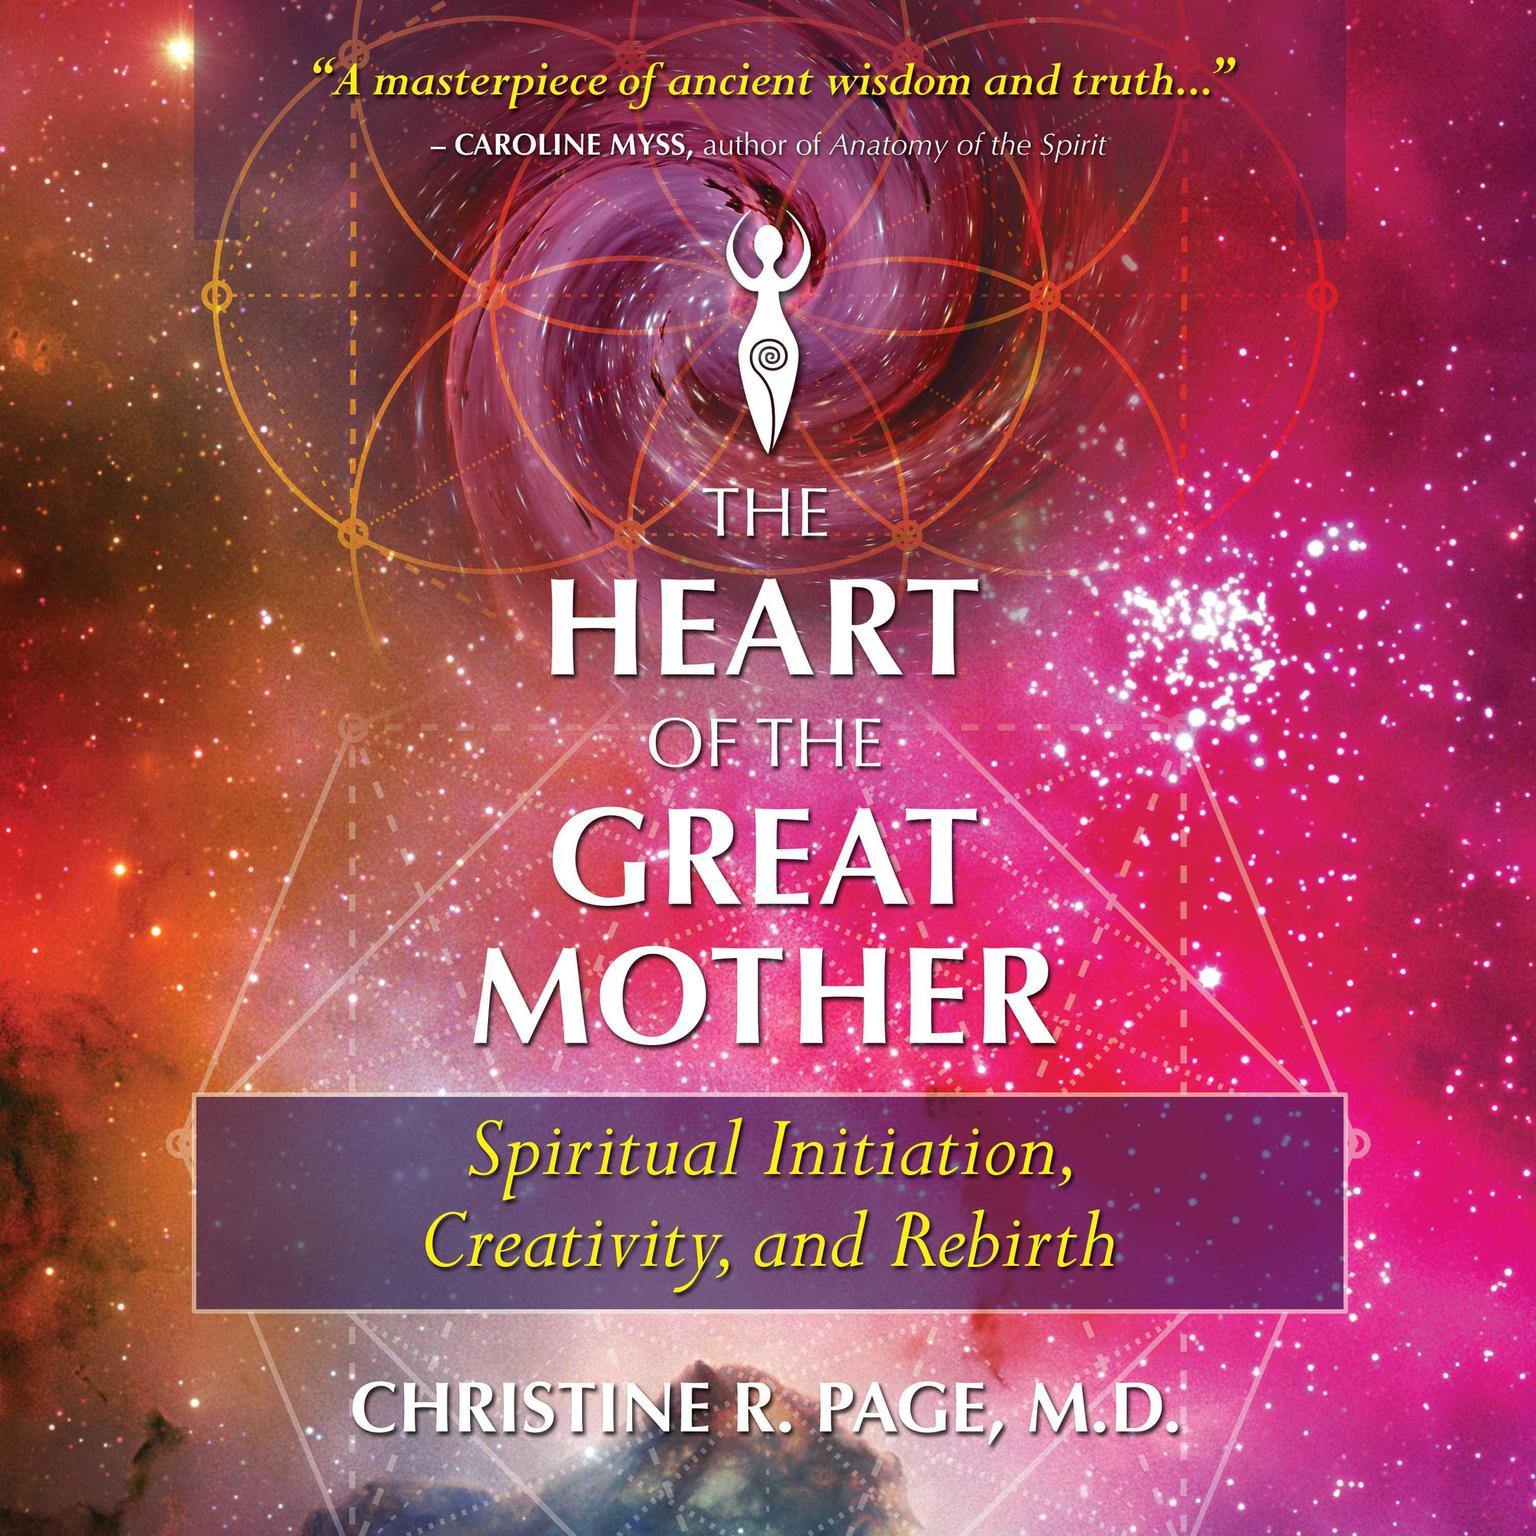 The Heart of the Great Mother: Spiritual Initiation, Creativity, and Rebirth Audiobook, by Christine R. Page